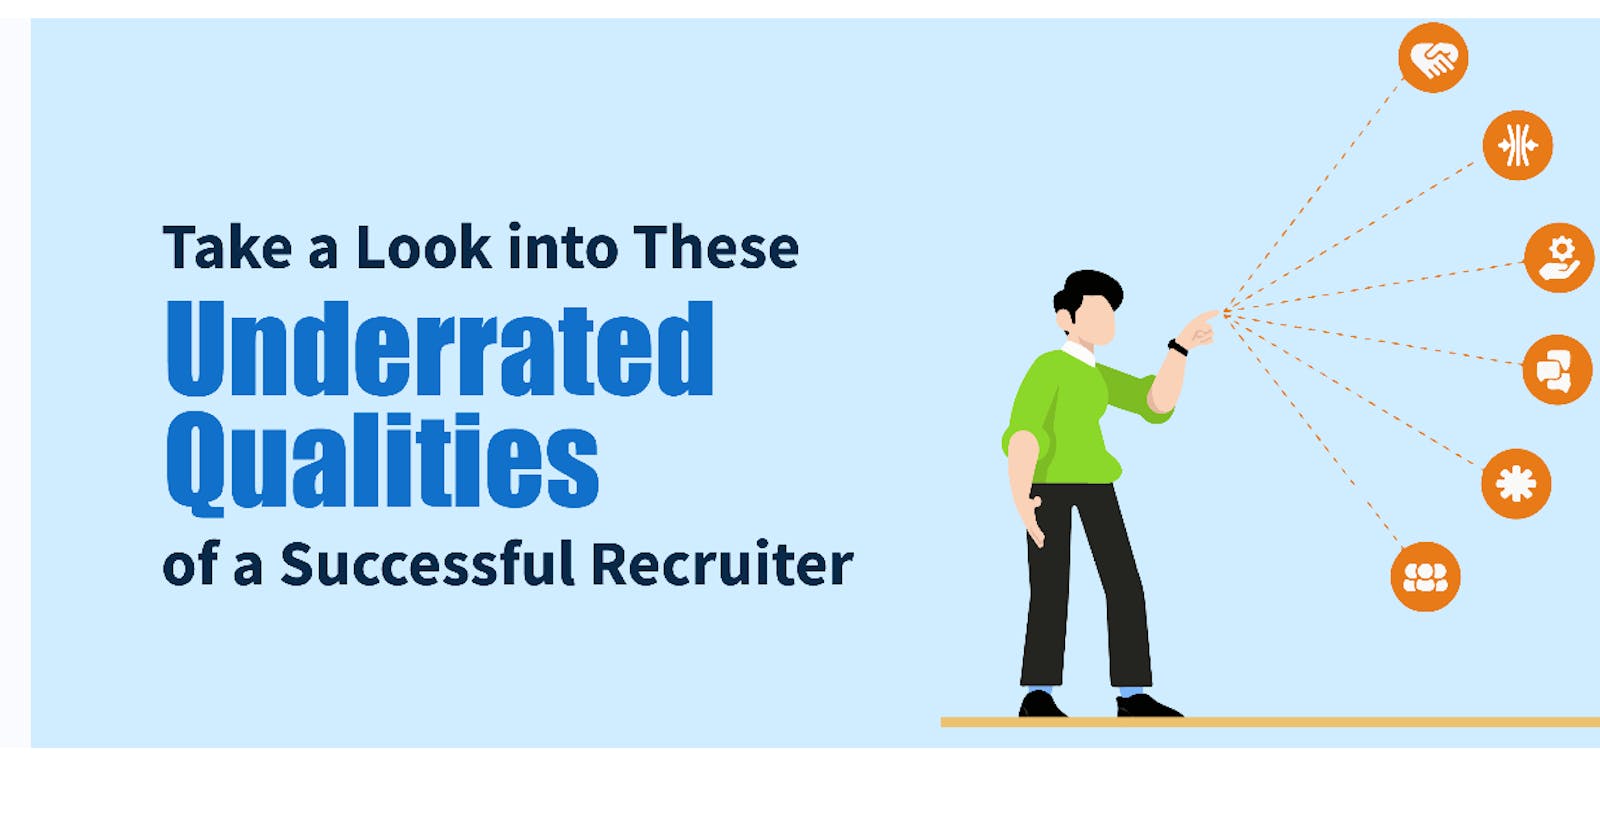 Learn These 6 Underrated Qualities of a Successful Recruiter